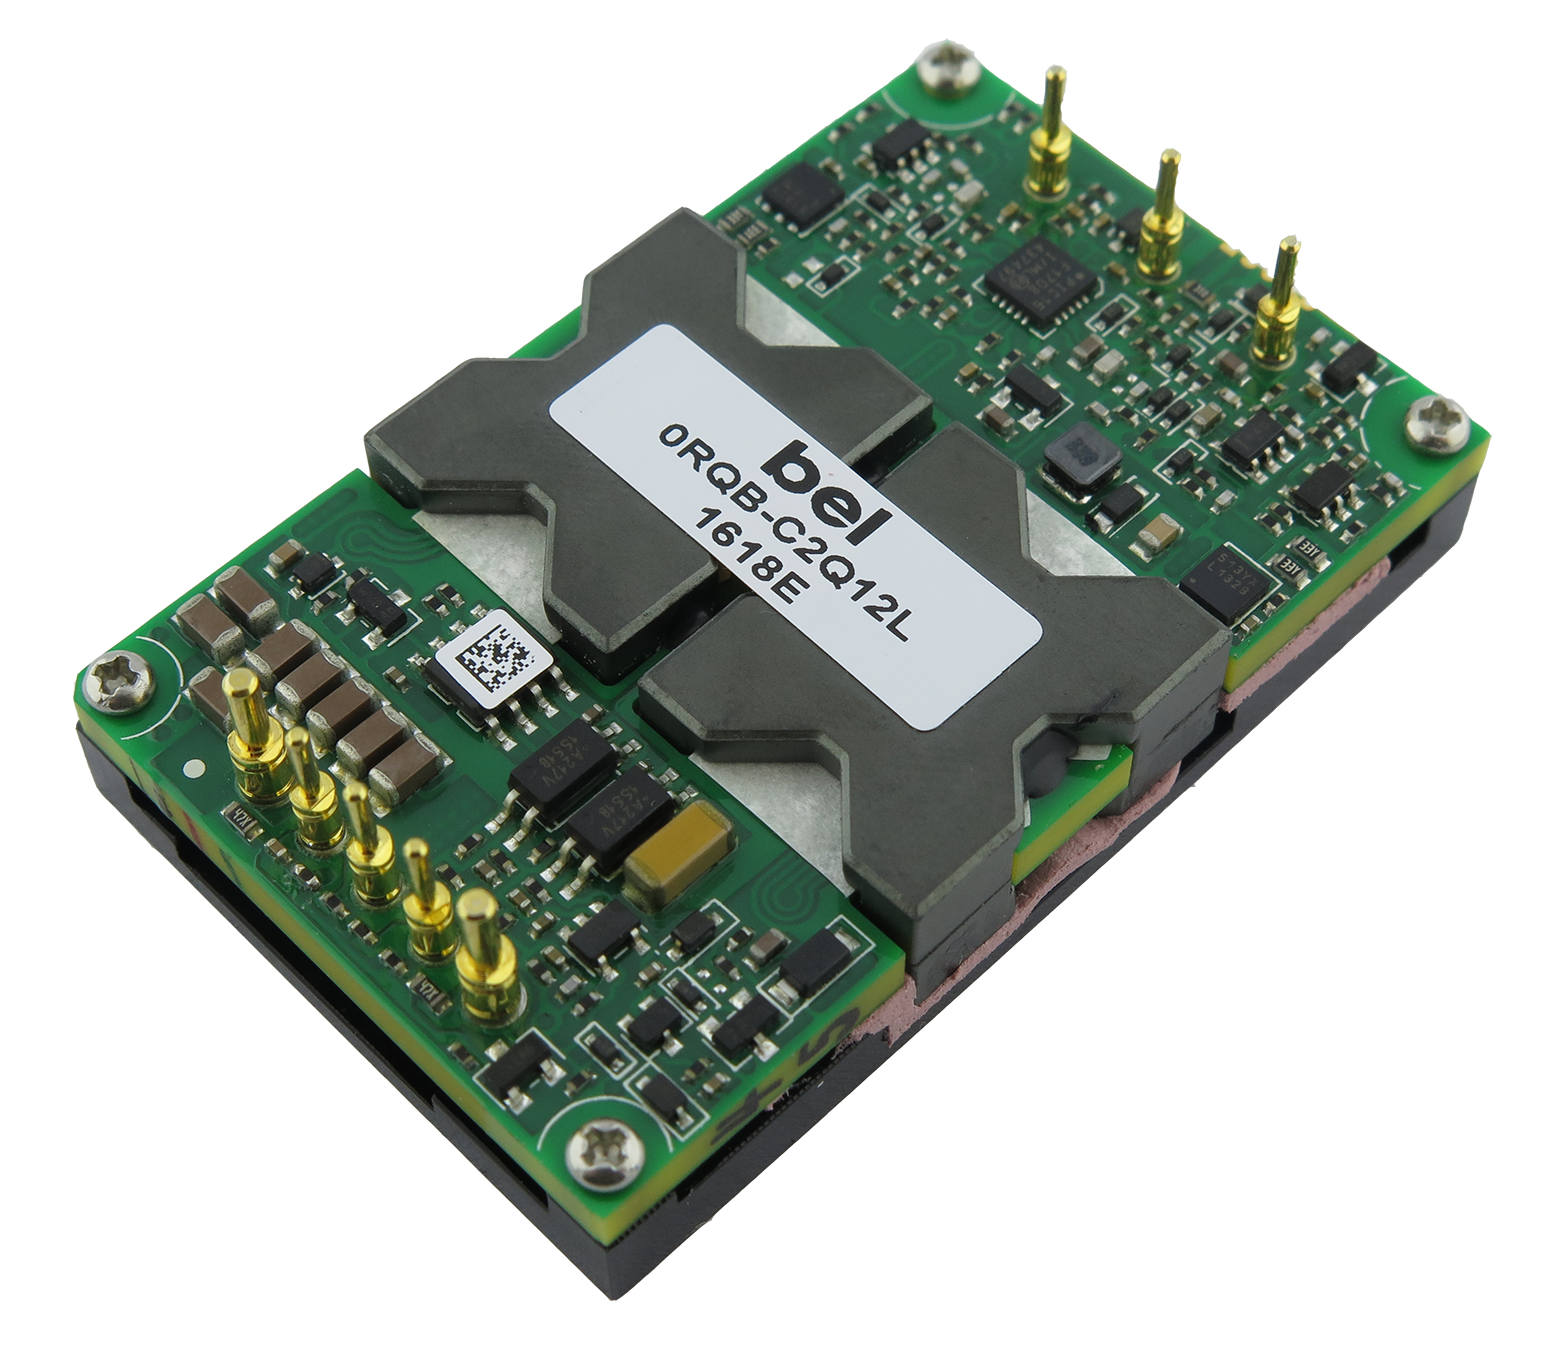 156 W Isolated Qtr. Brick DC/DC Converter Designed for Passenger Wi-Fi